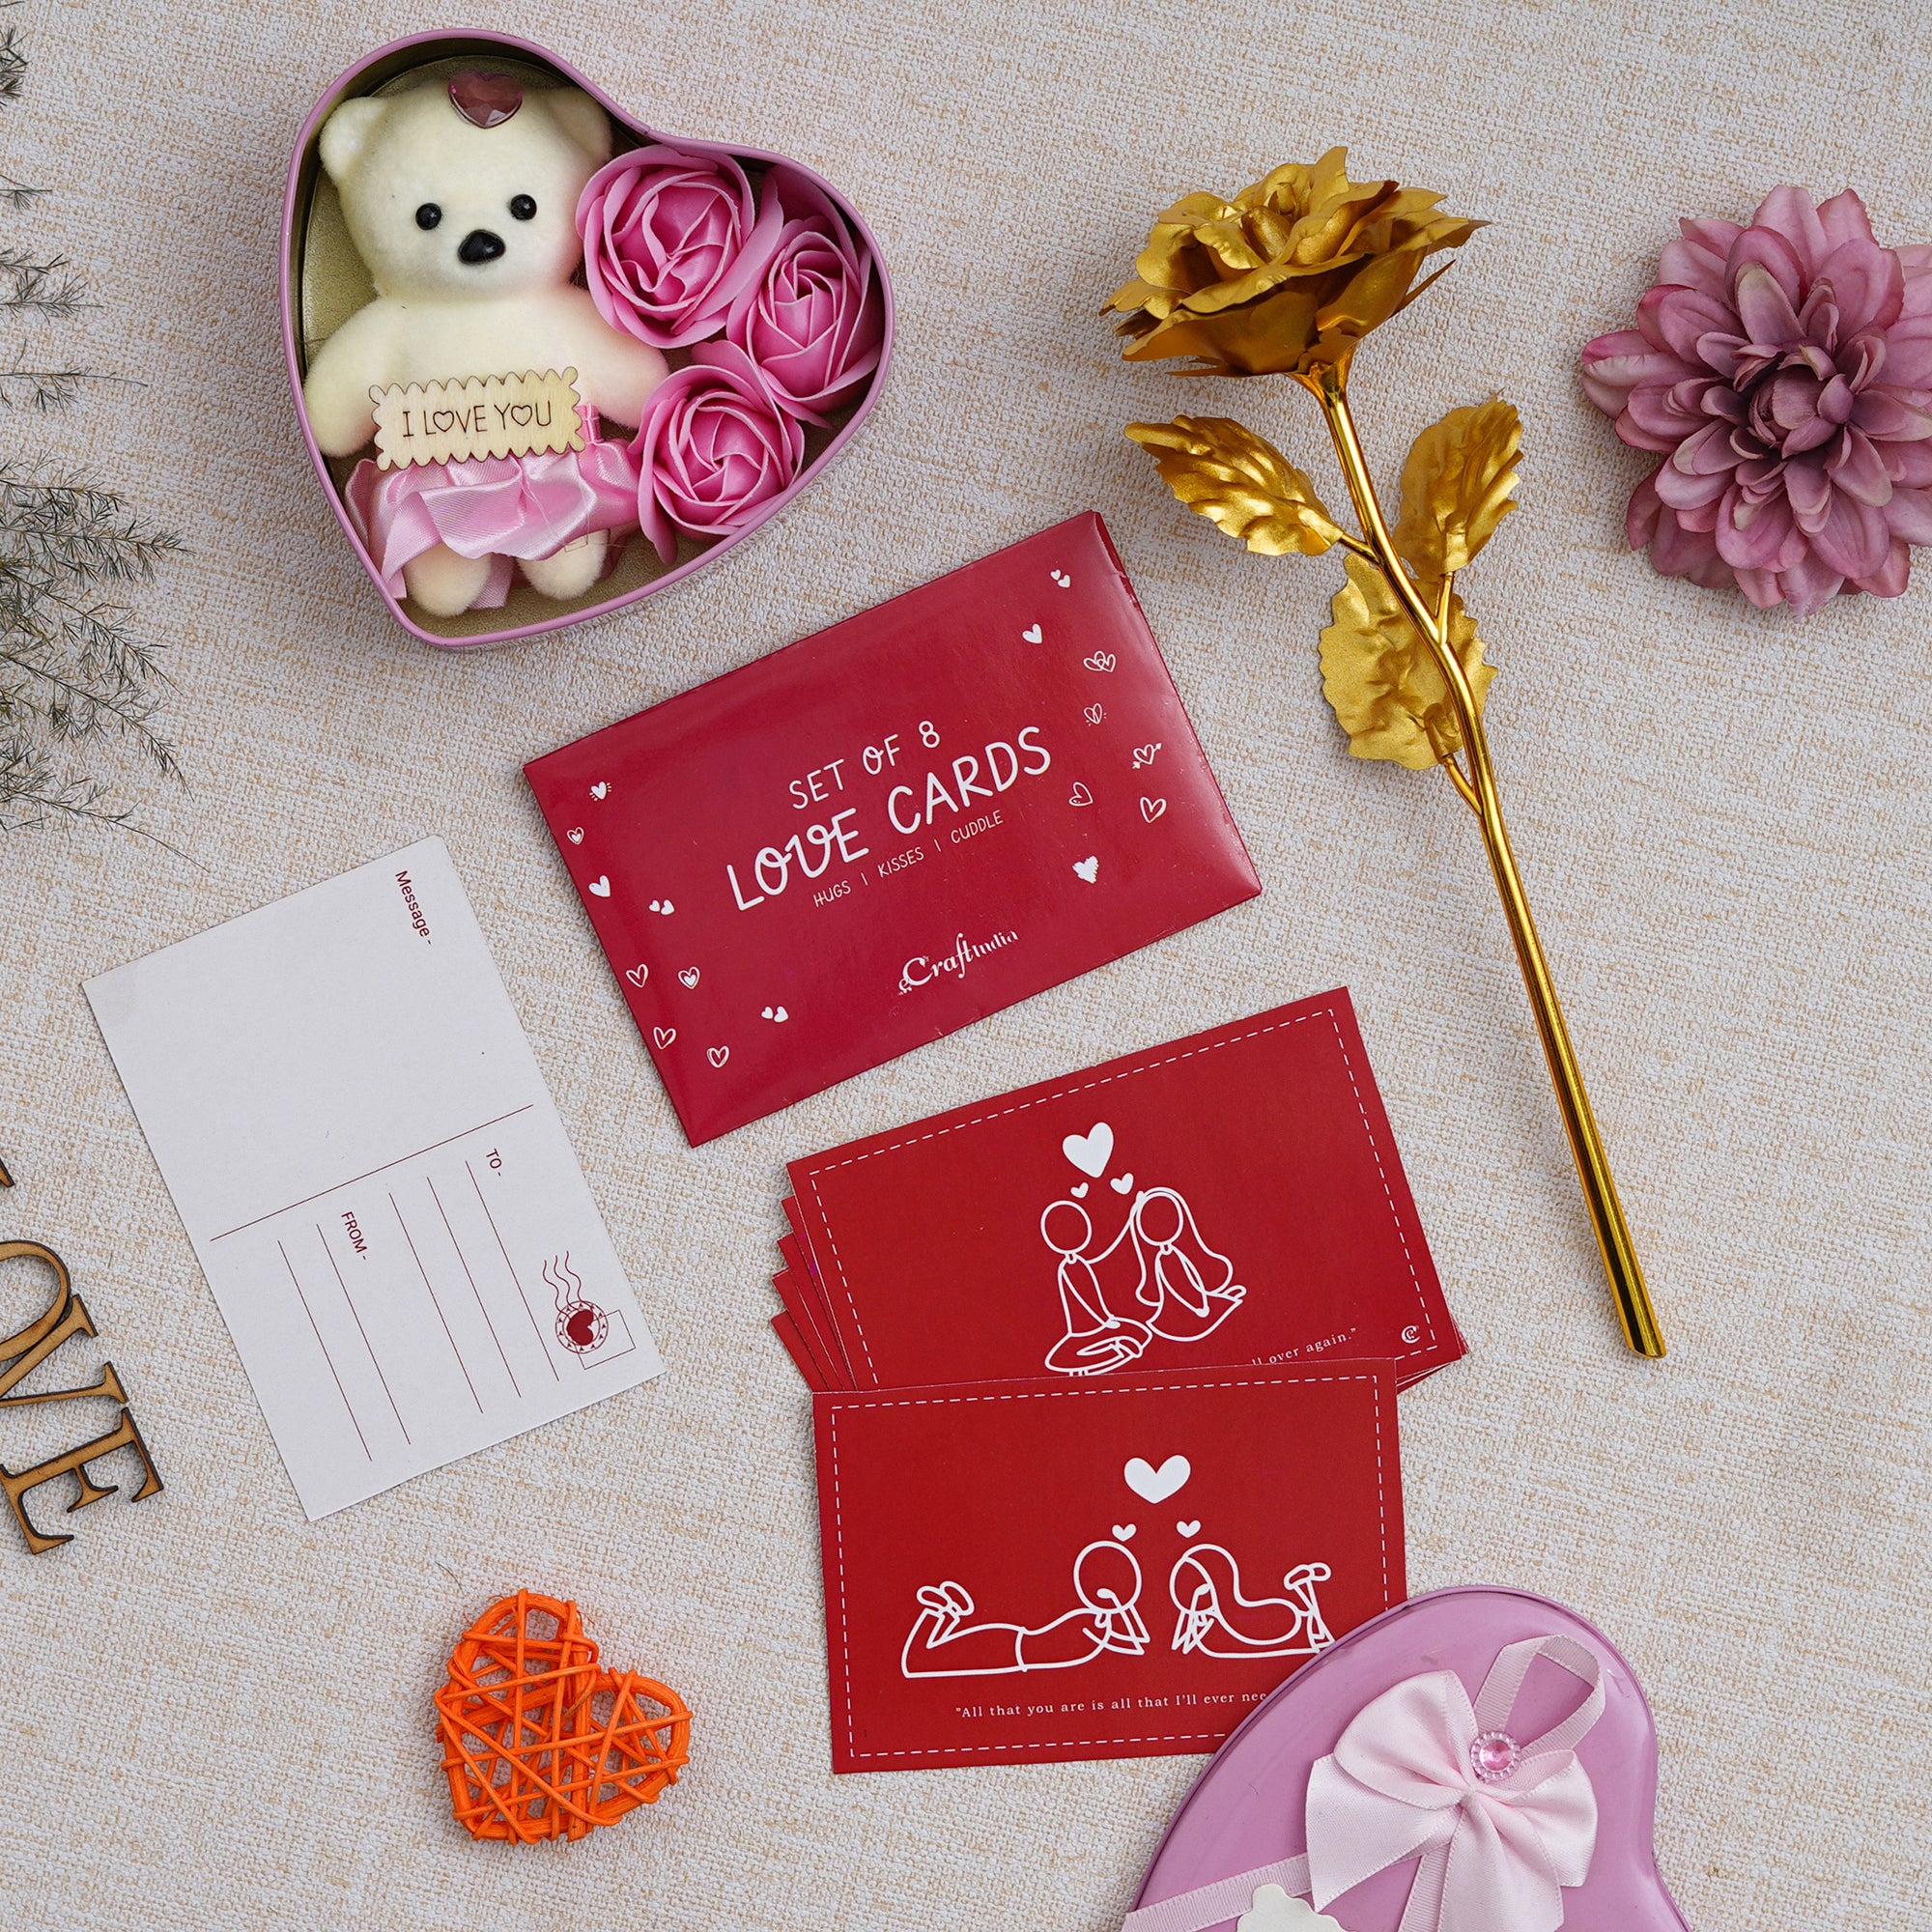 Valentine Combo of Pack of 8 Love Gift Cards, Golden Rose Gift Set, Pink Heart Shaped Gift Box with Teddy and Roses